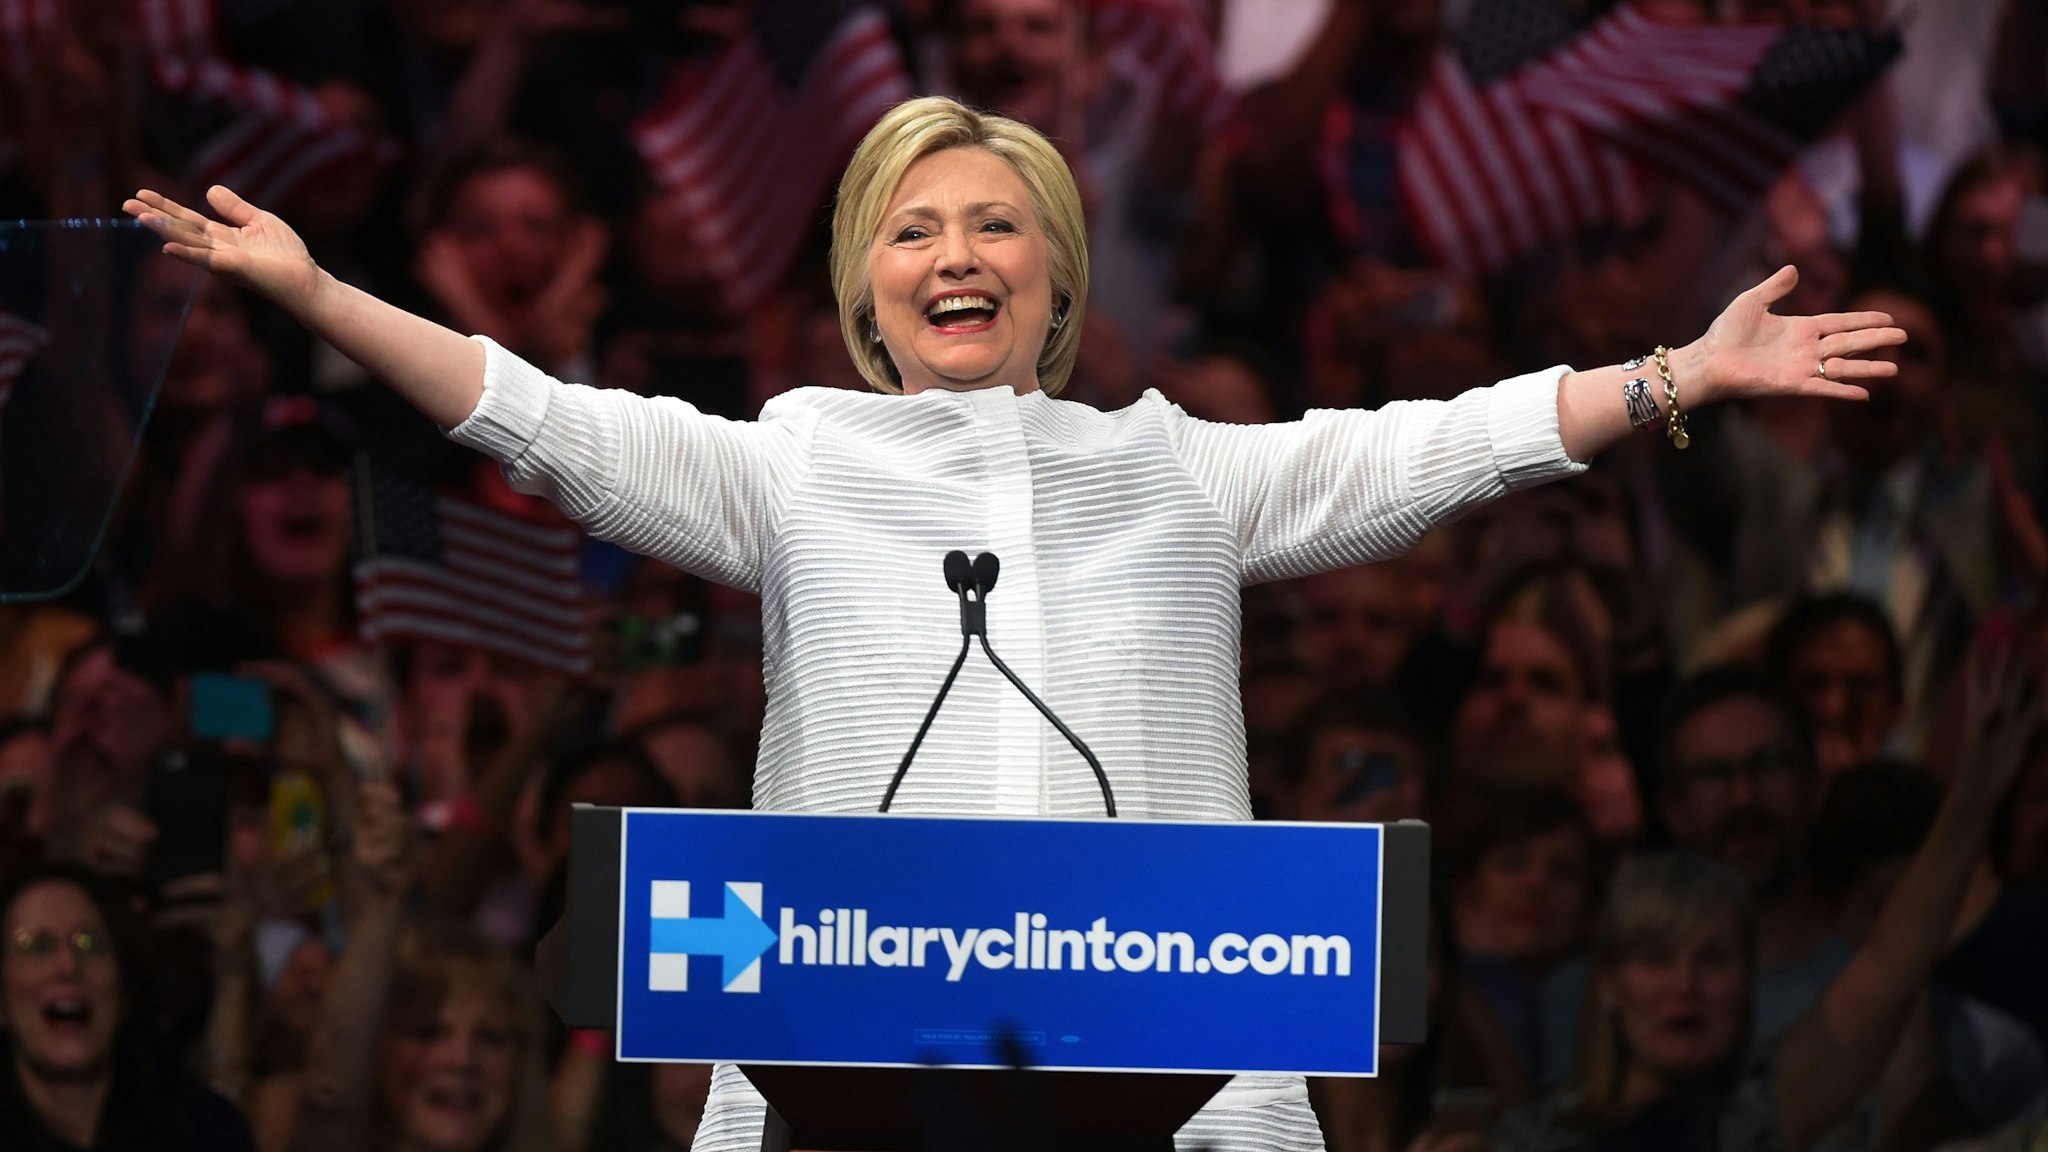 Democratic presidential candidate Hillary Clinton acknowledges celebratory cheers from the crowd during her primary night event at the Duggal Greenhouse, Brooklyn Navy Yard, June 7, 2016 in New York. Hillary Clinton hailed a historical "milestone" for women as she claimed victory over rival Bernie Sanders in the Democratic White House nomination race.